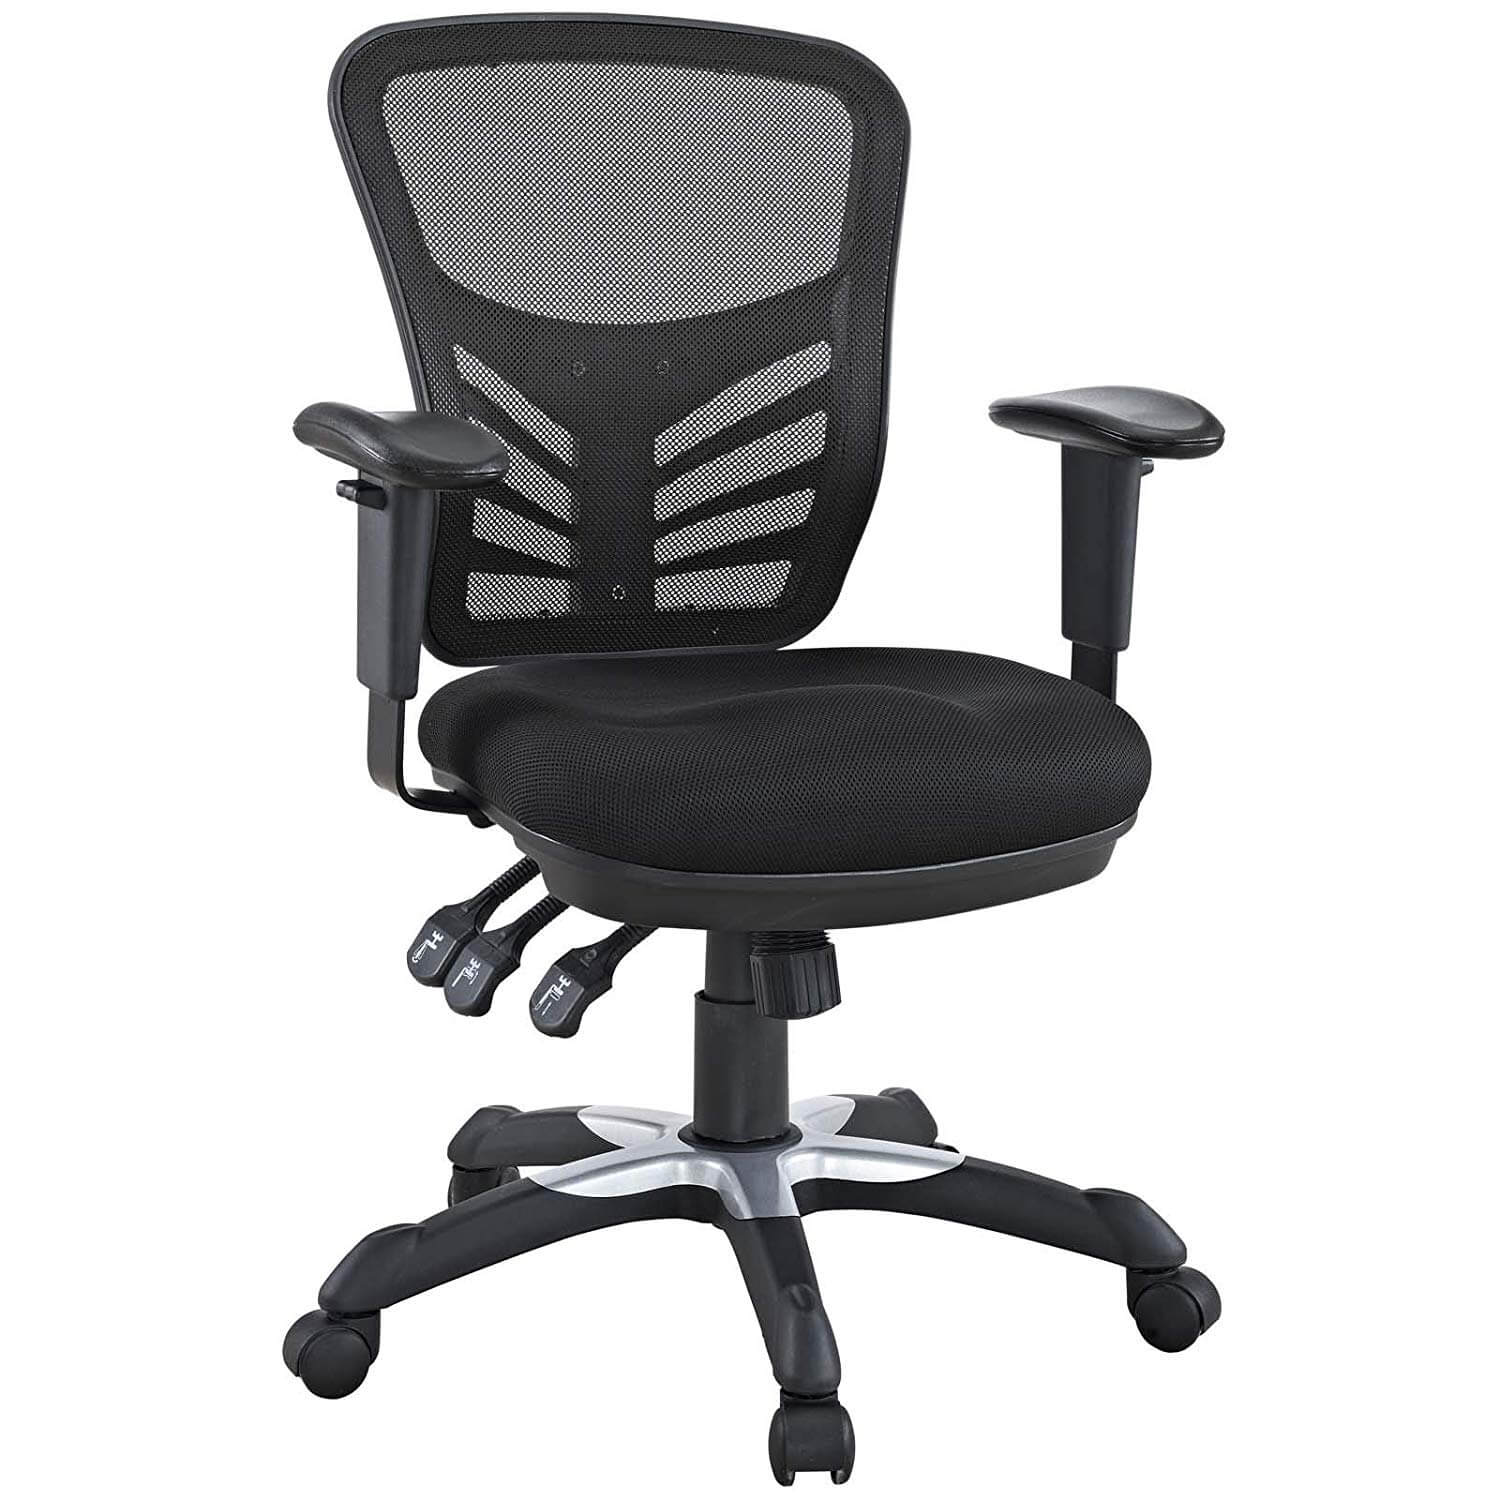 Cheap Office Chairs - Best Budget Chairs For You